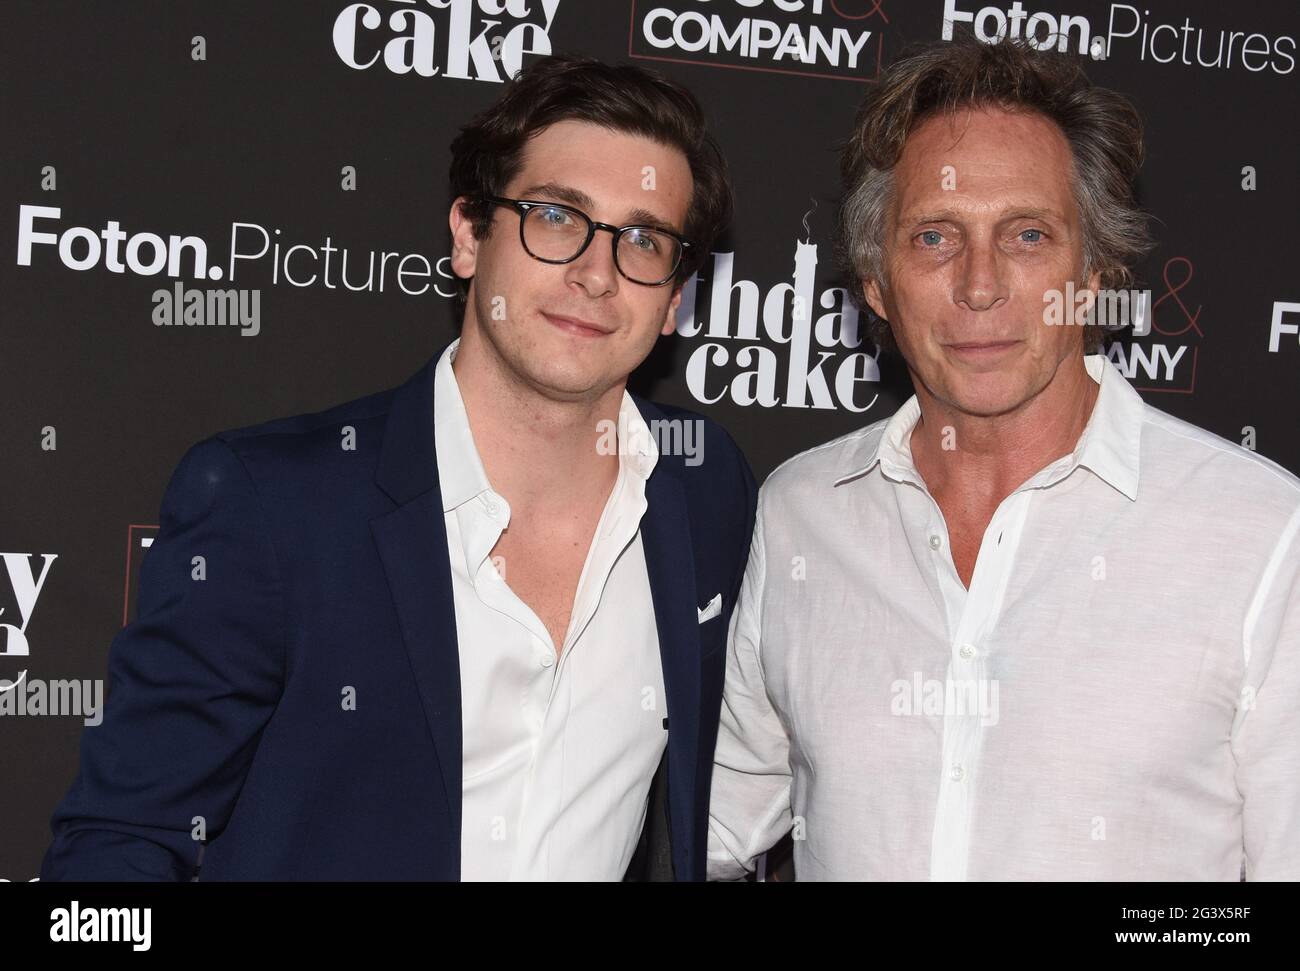 Beverly Hills, California, USA 16th June 2021 Actor Sam Fichtner and father actor William Fichtner attend The Los Angeles Premiere of The Birthday Cake on June 16, 2021 at Fine Arts Theater in Beverly Hills, California, USA. Photo by Barry King/Alamy Stock Photo Stock Photo